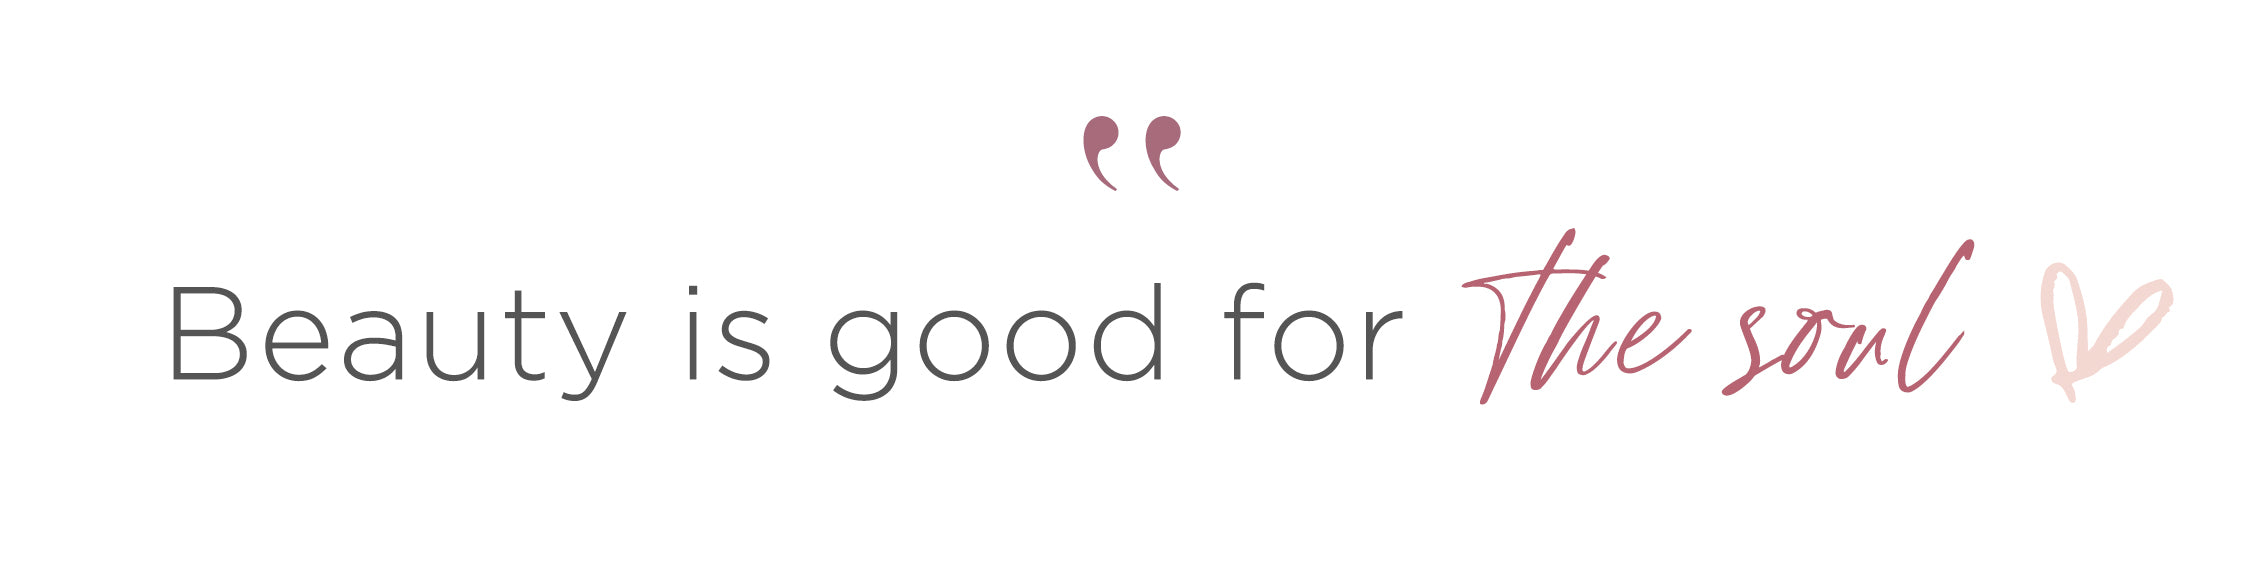 Beauty is good for the soul quote